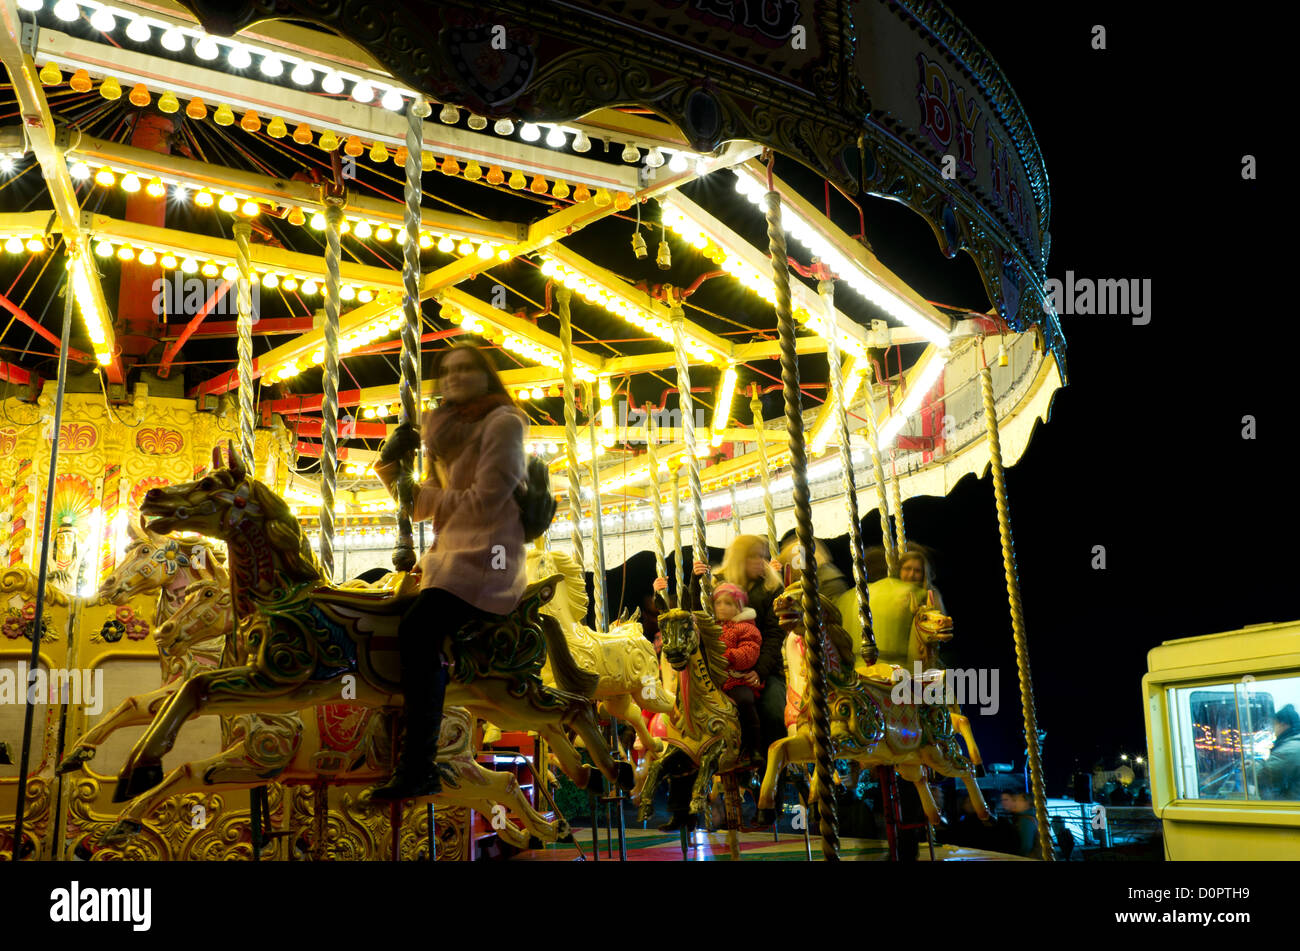 The Galloping Horses carousel in the fairground at the annual fireworks South Park, Oxford, UK Stock Photo